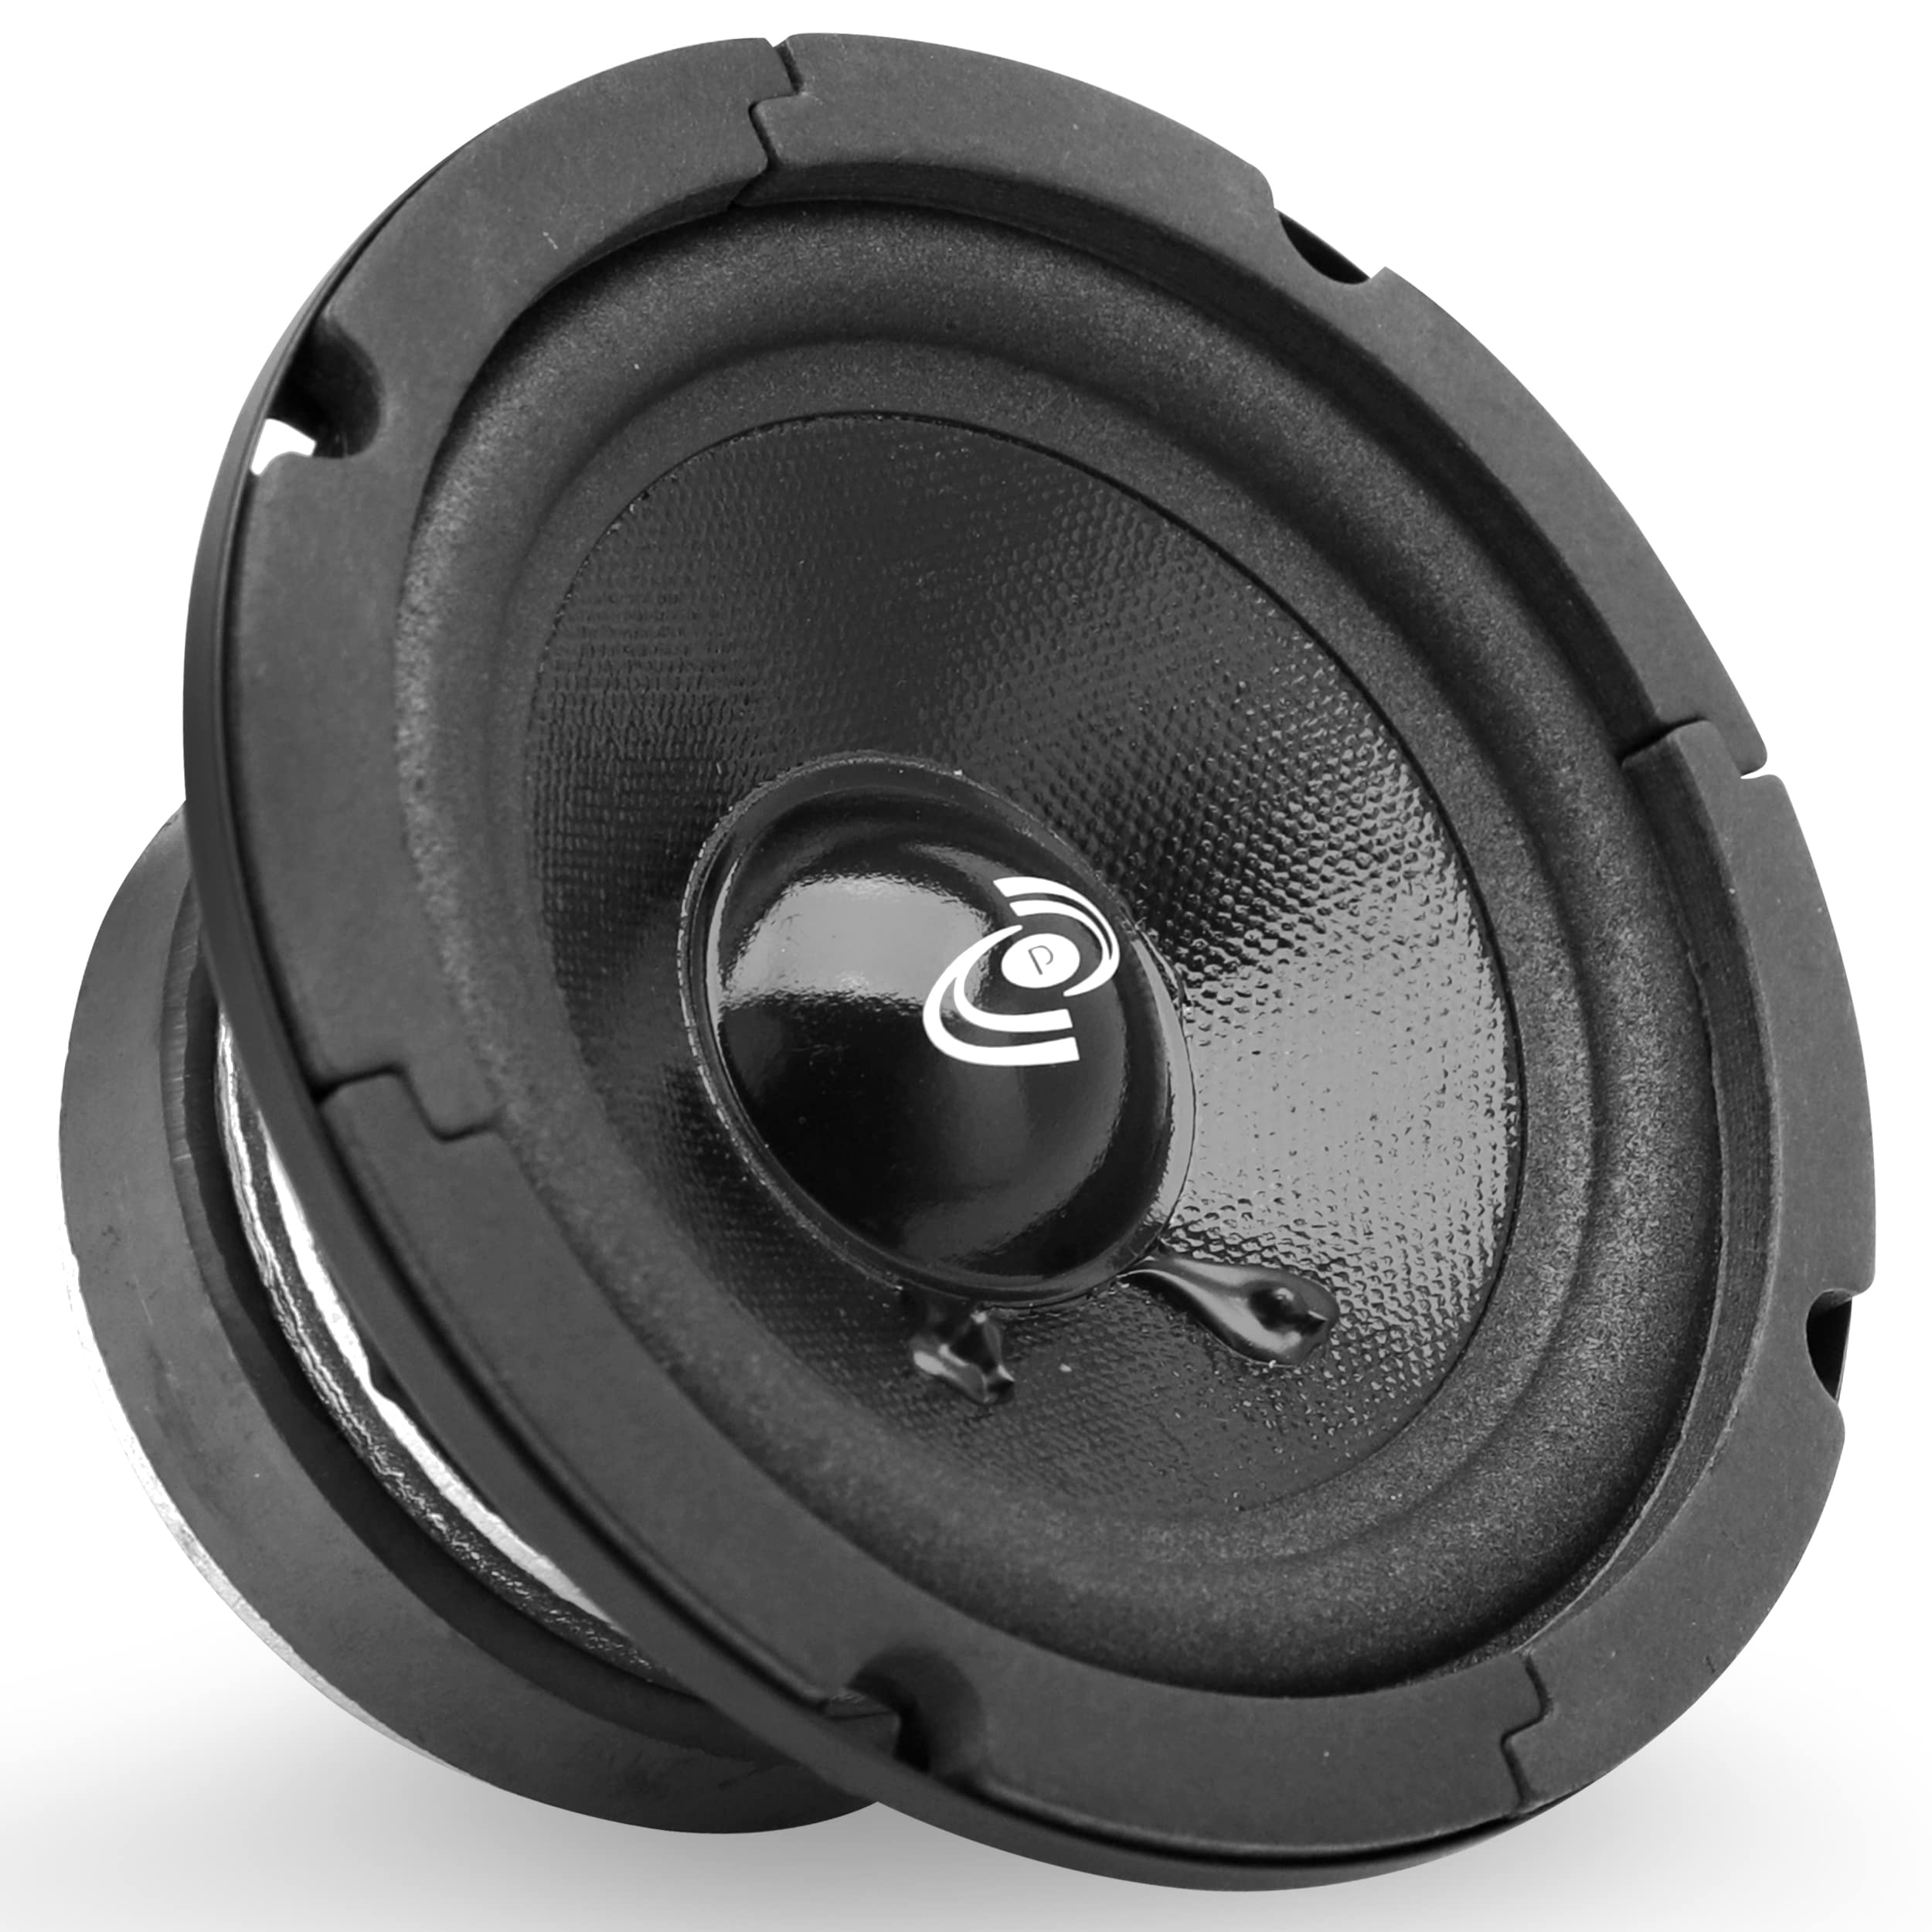 Pyle 5 Inch Woofer Driver-Upgraded 200 Watt Peak High Performance Mid-Bass Mid-Range Car Speaker 450Hz-7kHz Frequency Response 15 Oz Magnet Structure 8 Ohm w/ 92dB and Paper Coating Cone-PDMR5 Black